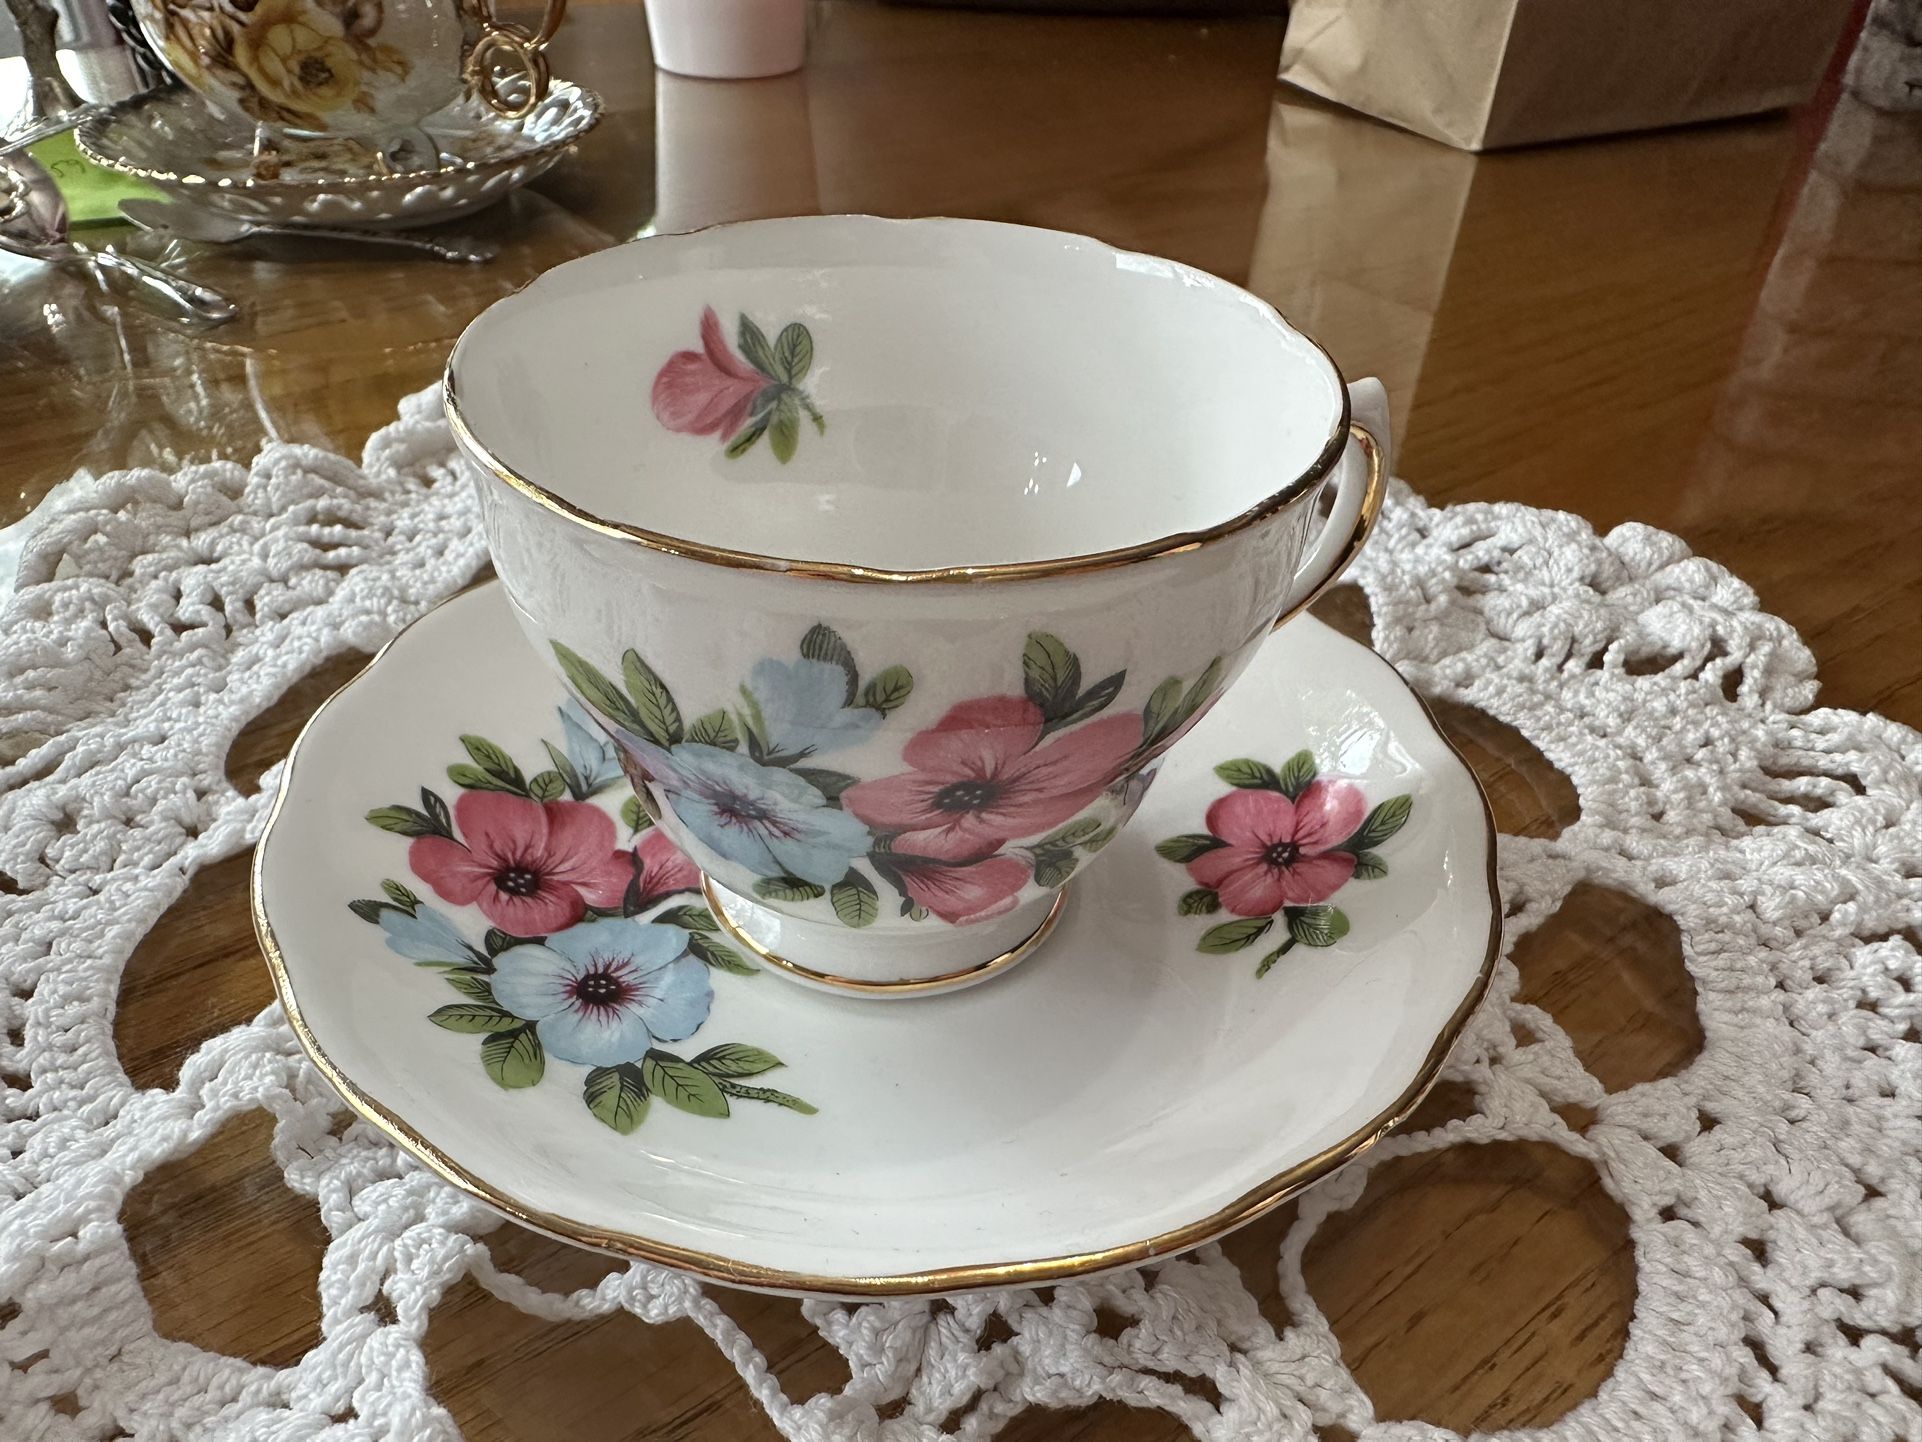 Royals Vale Cup & saucer Made in England By Ridgeway Potteries Bone China 